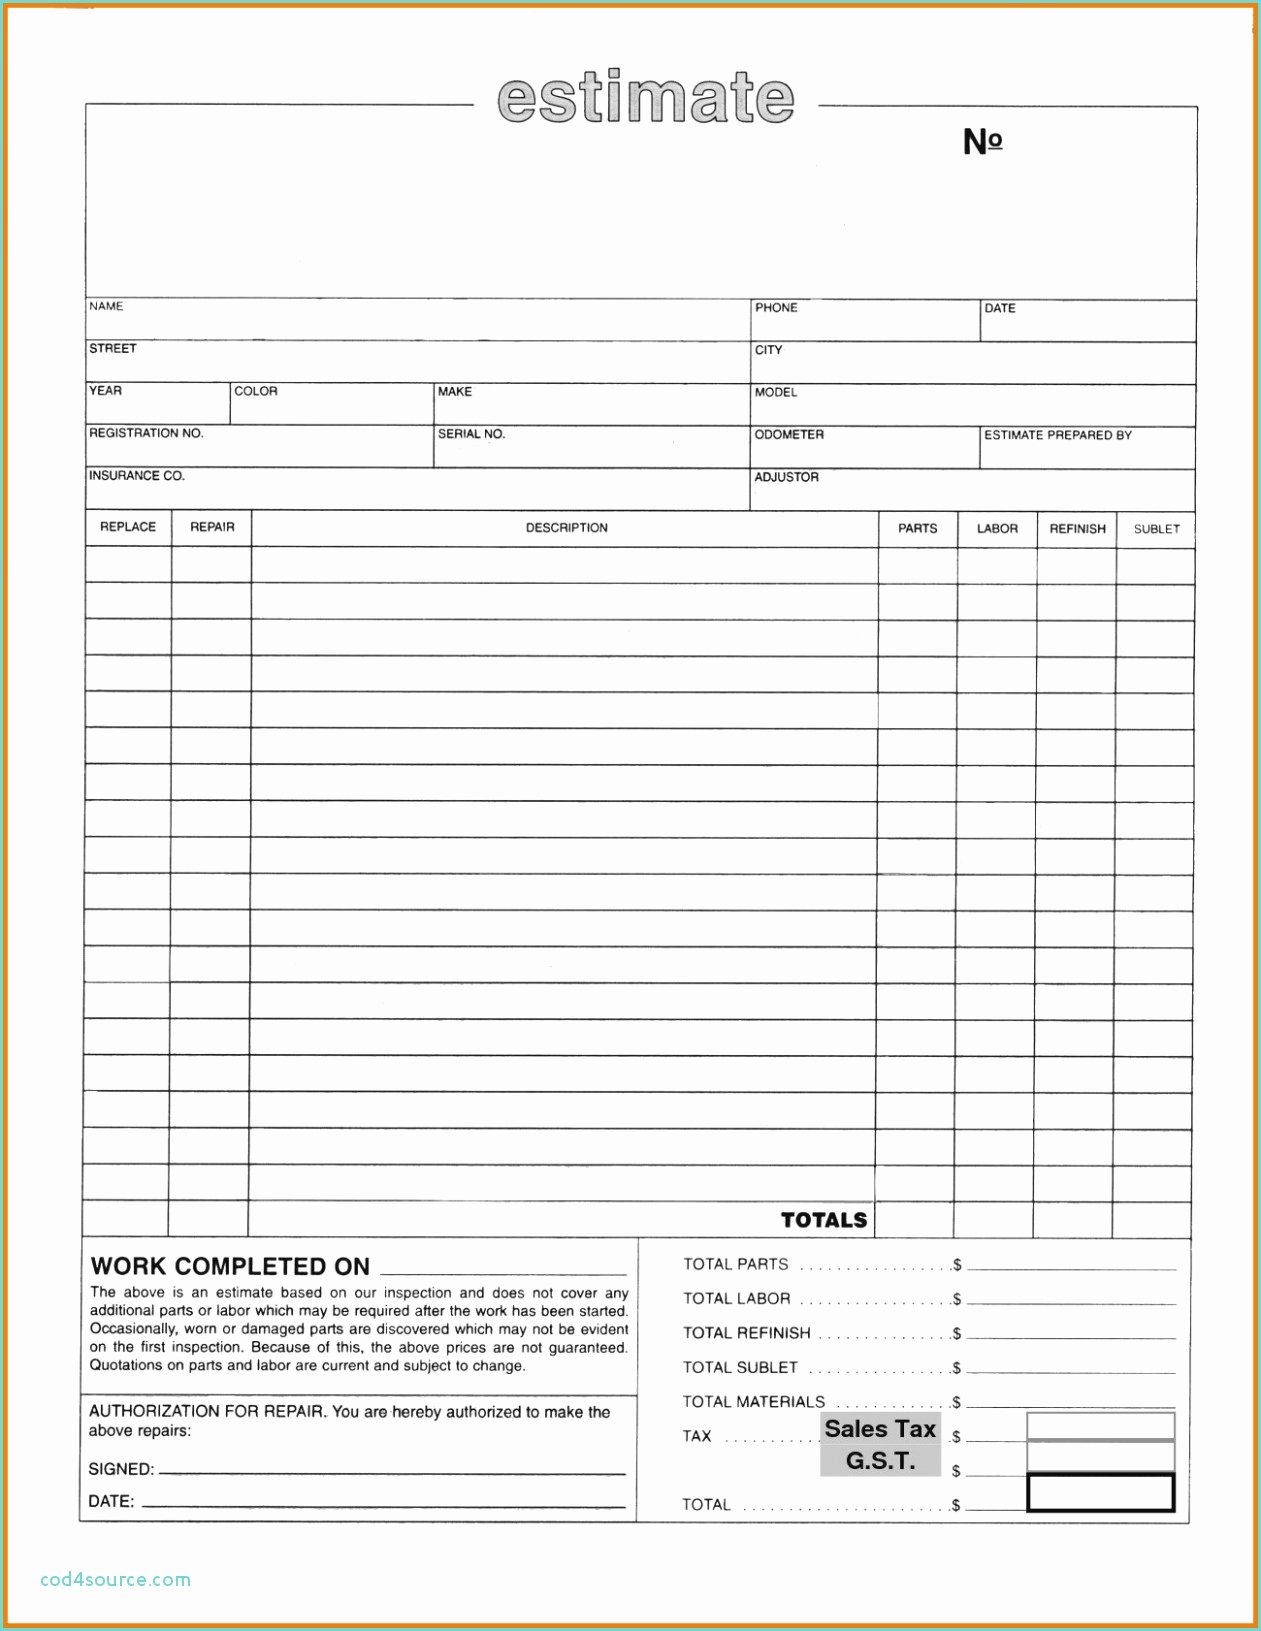 Tree Trimming Estimate Template Latter Example Template